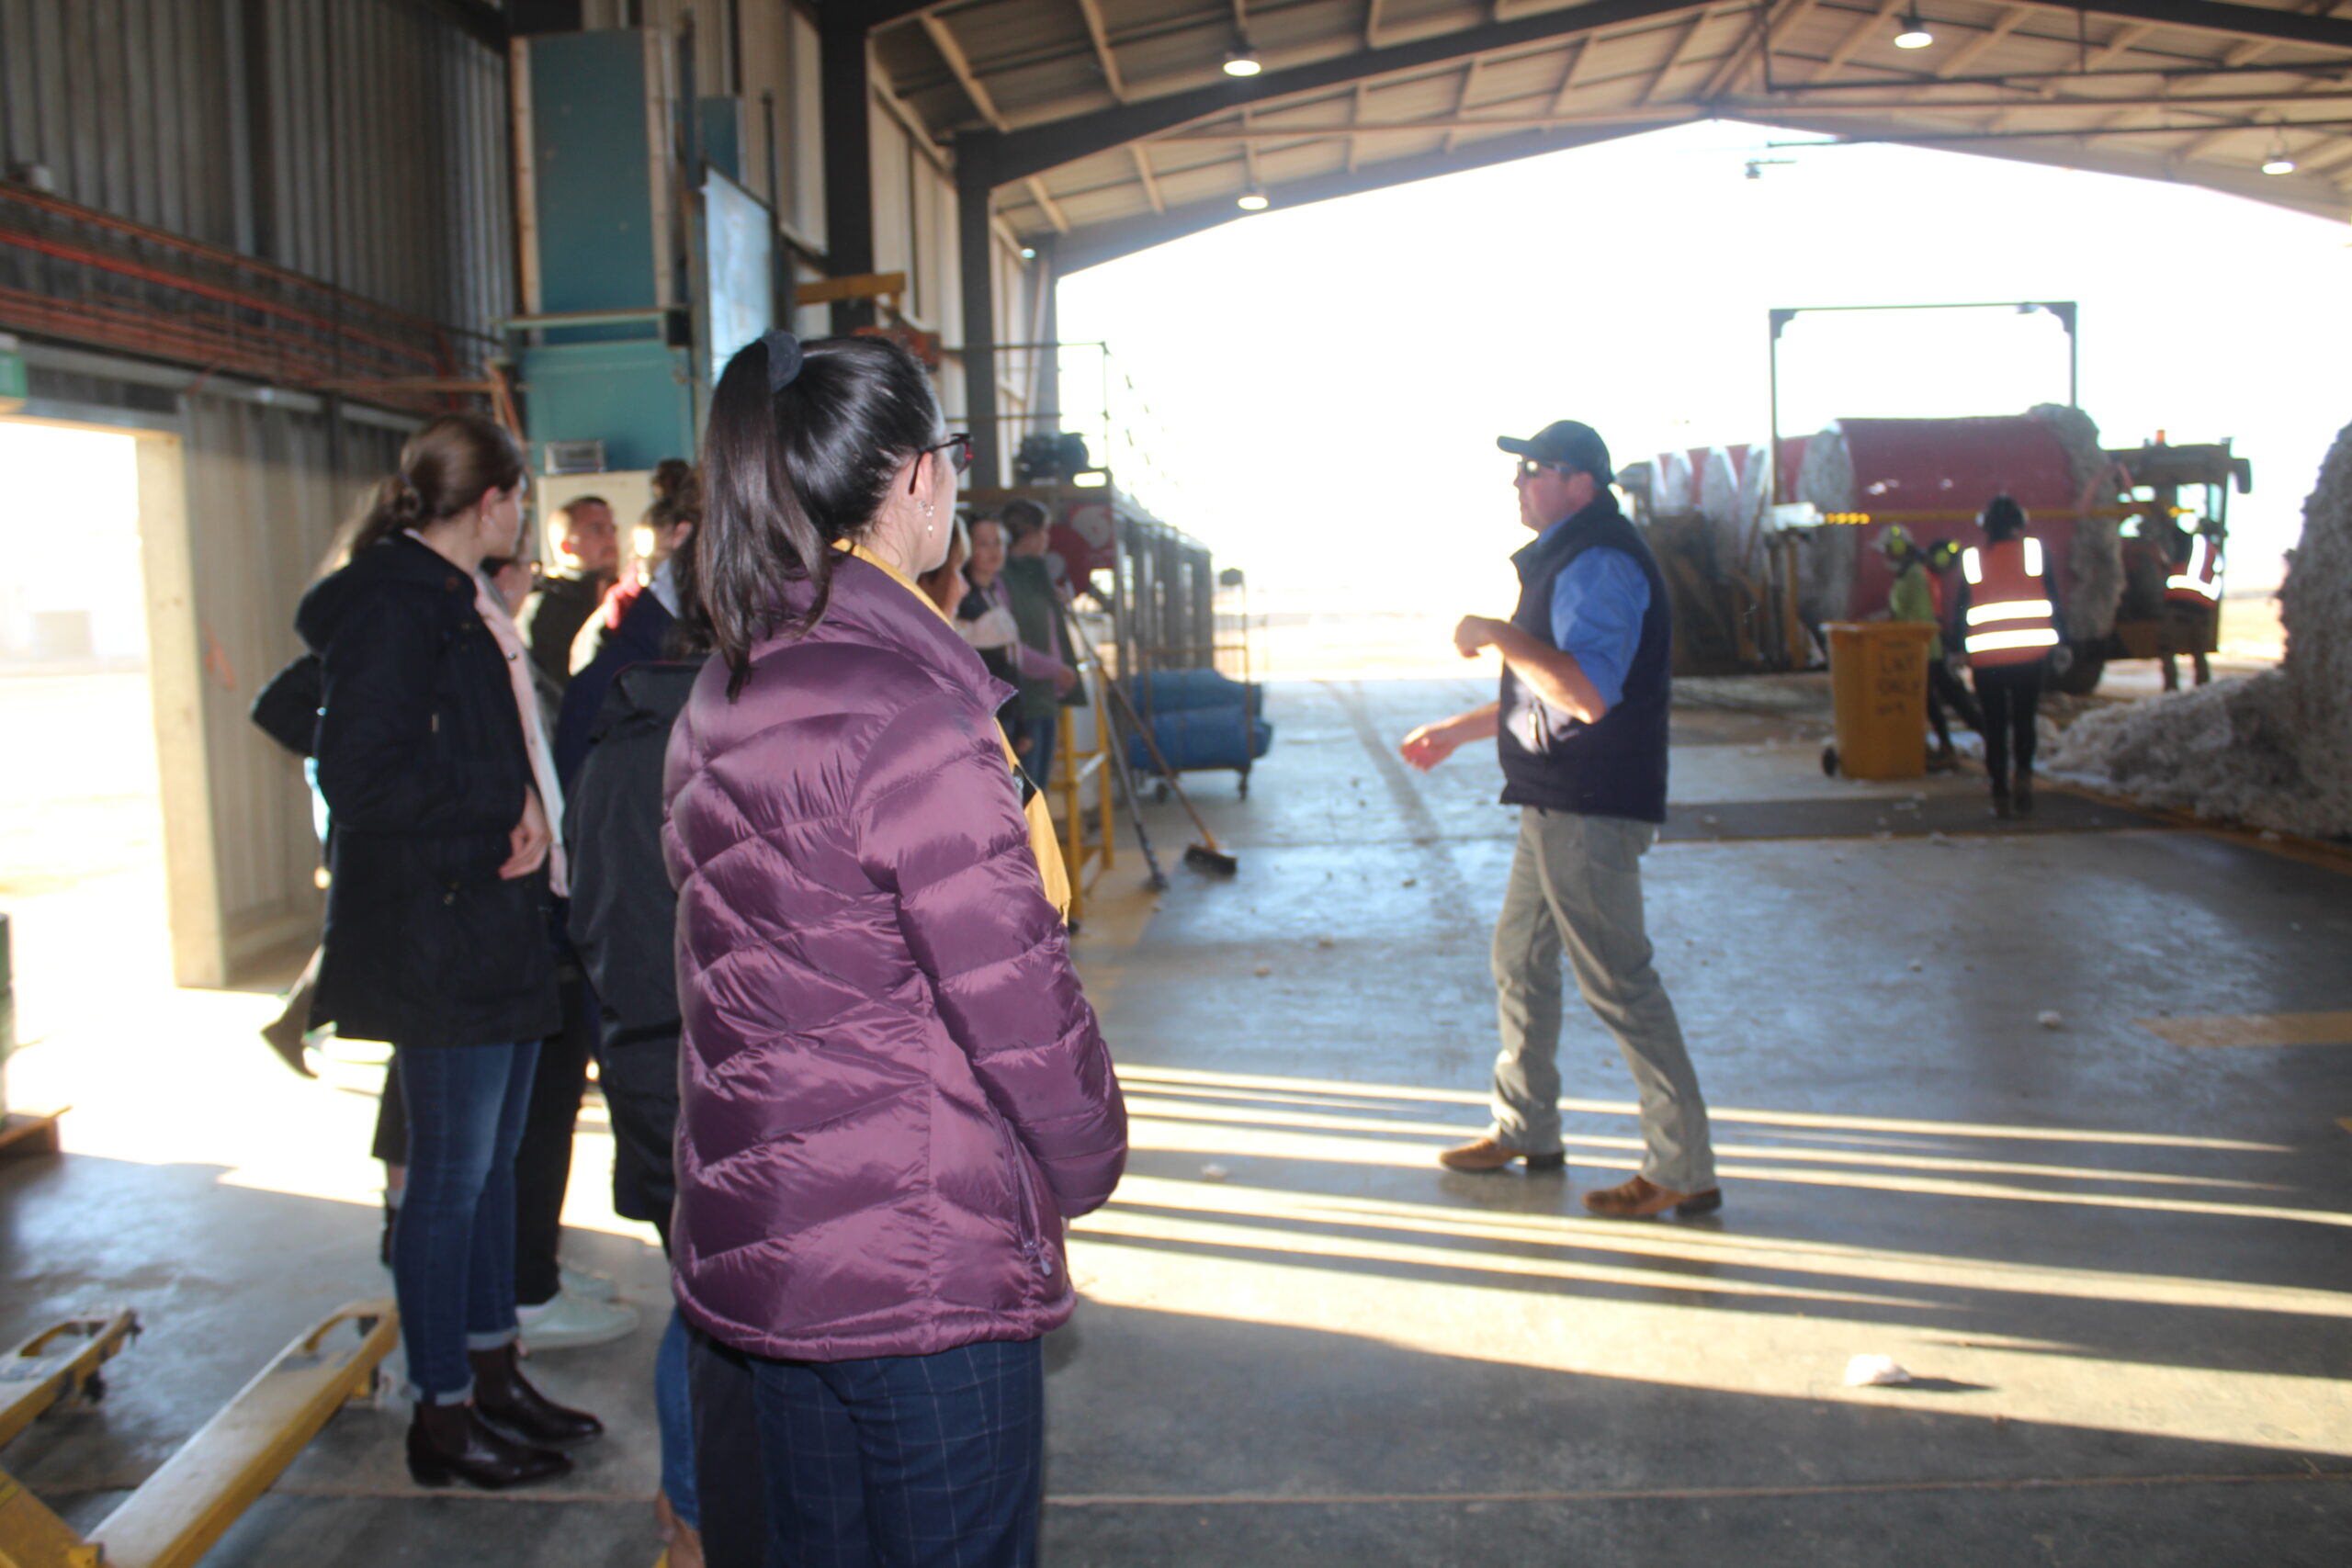 Ben Palmer addressing one of the groups, explaining the cotton bale deseeding process from inside the ginning shed.